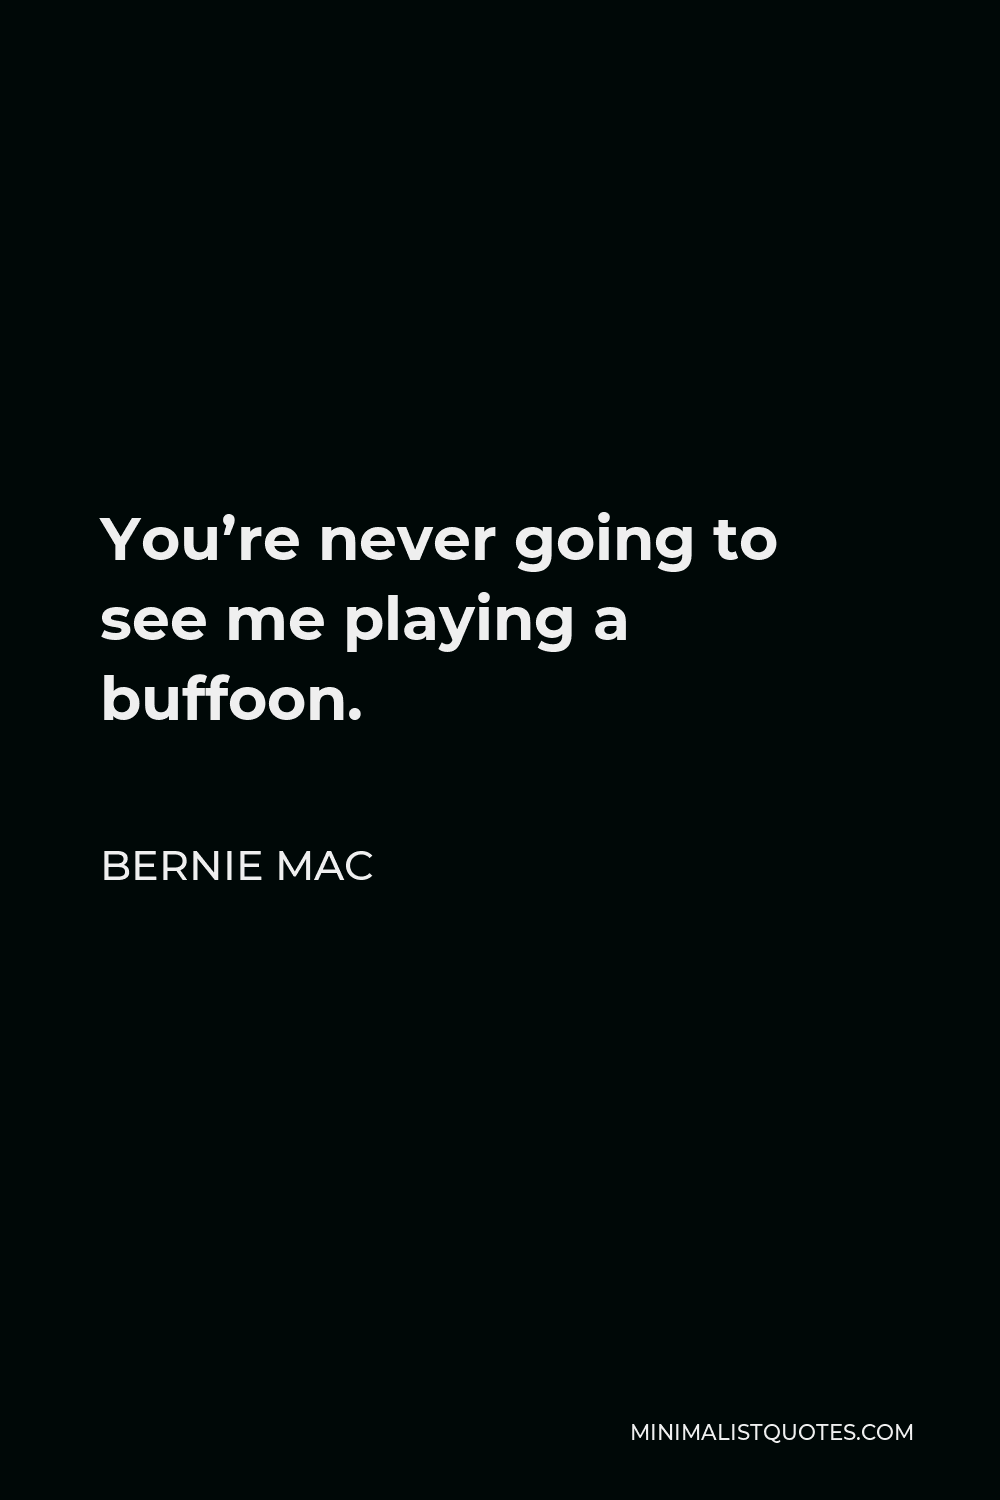 Bernie Mac Quote - You’re never going to see me playing a buffoon.